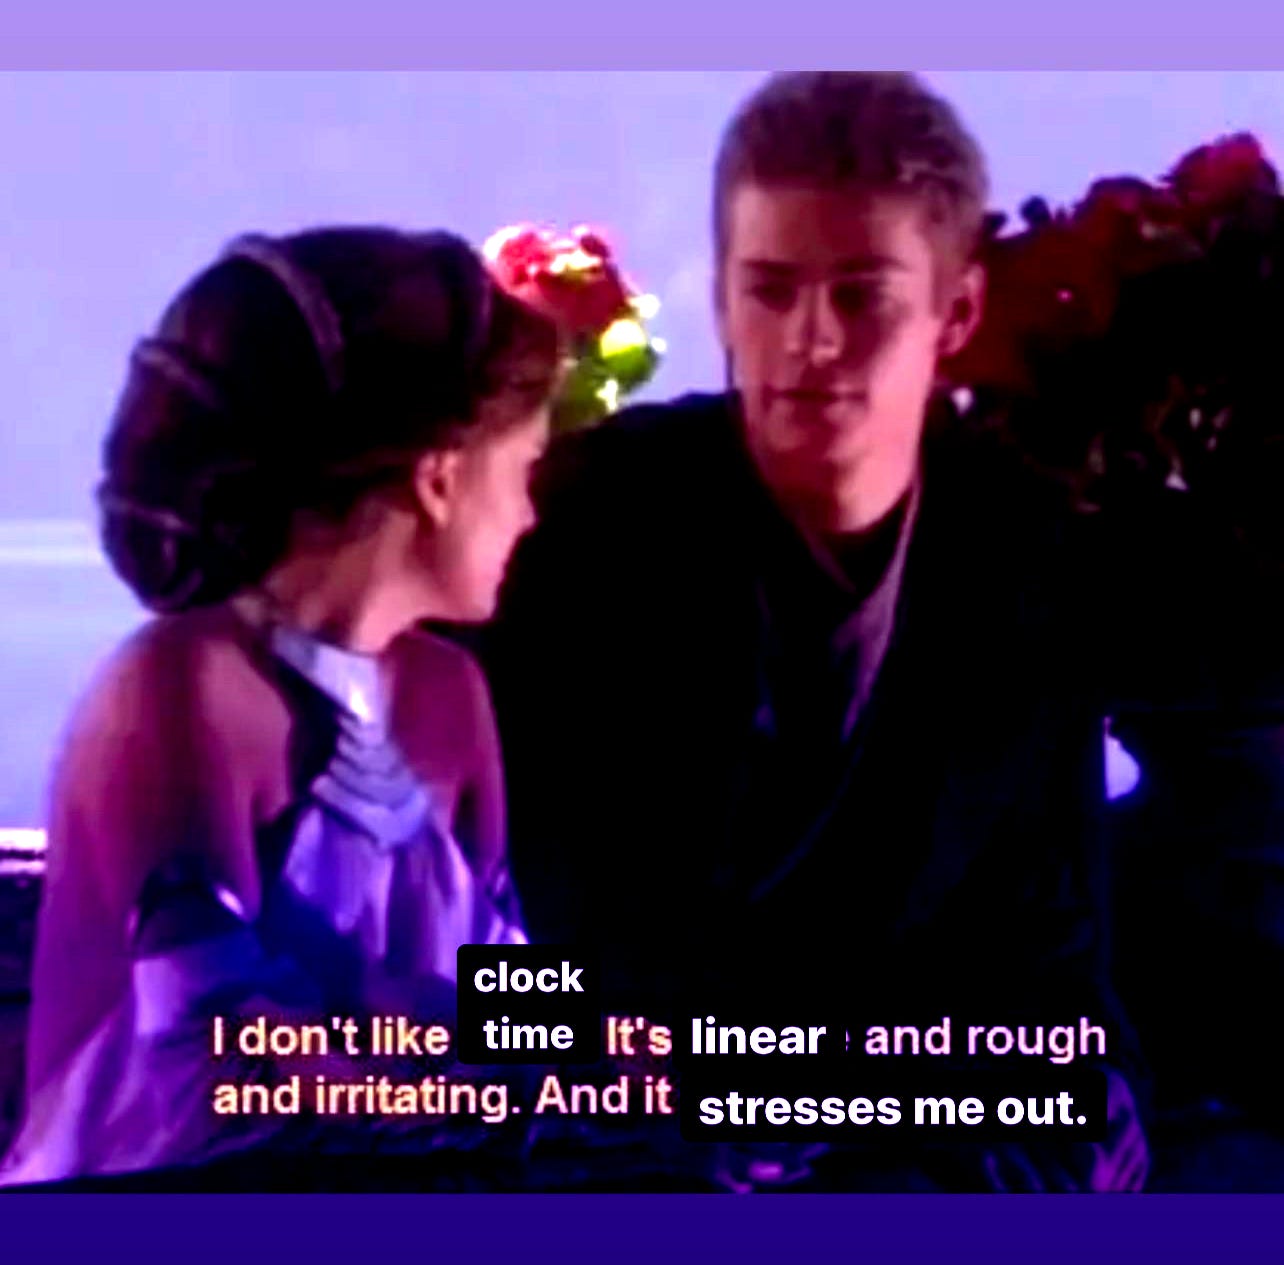 anakin sand meme but it says "i don't like clock time. It's linear and rough and irritating. And it stressed me out."